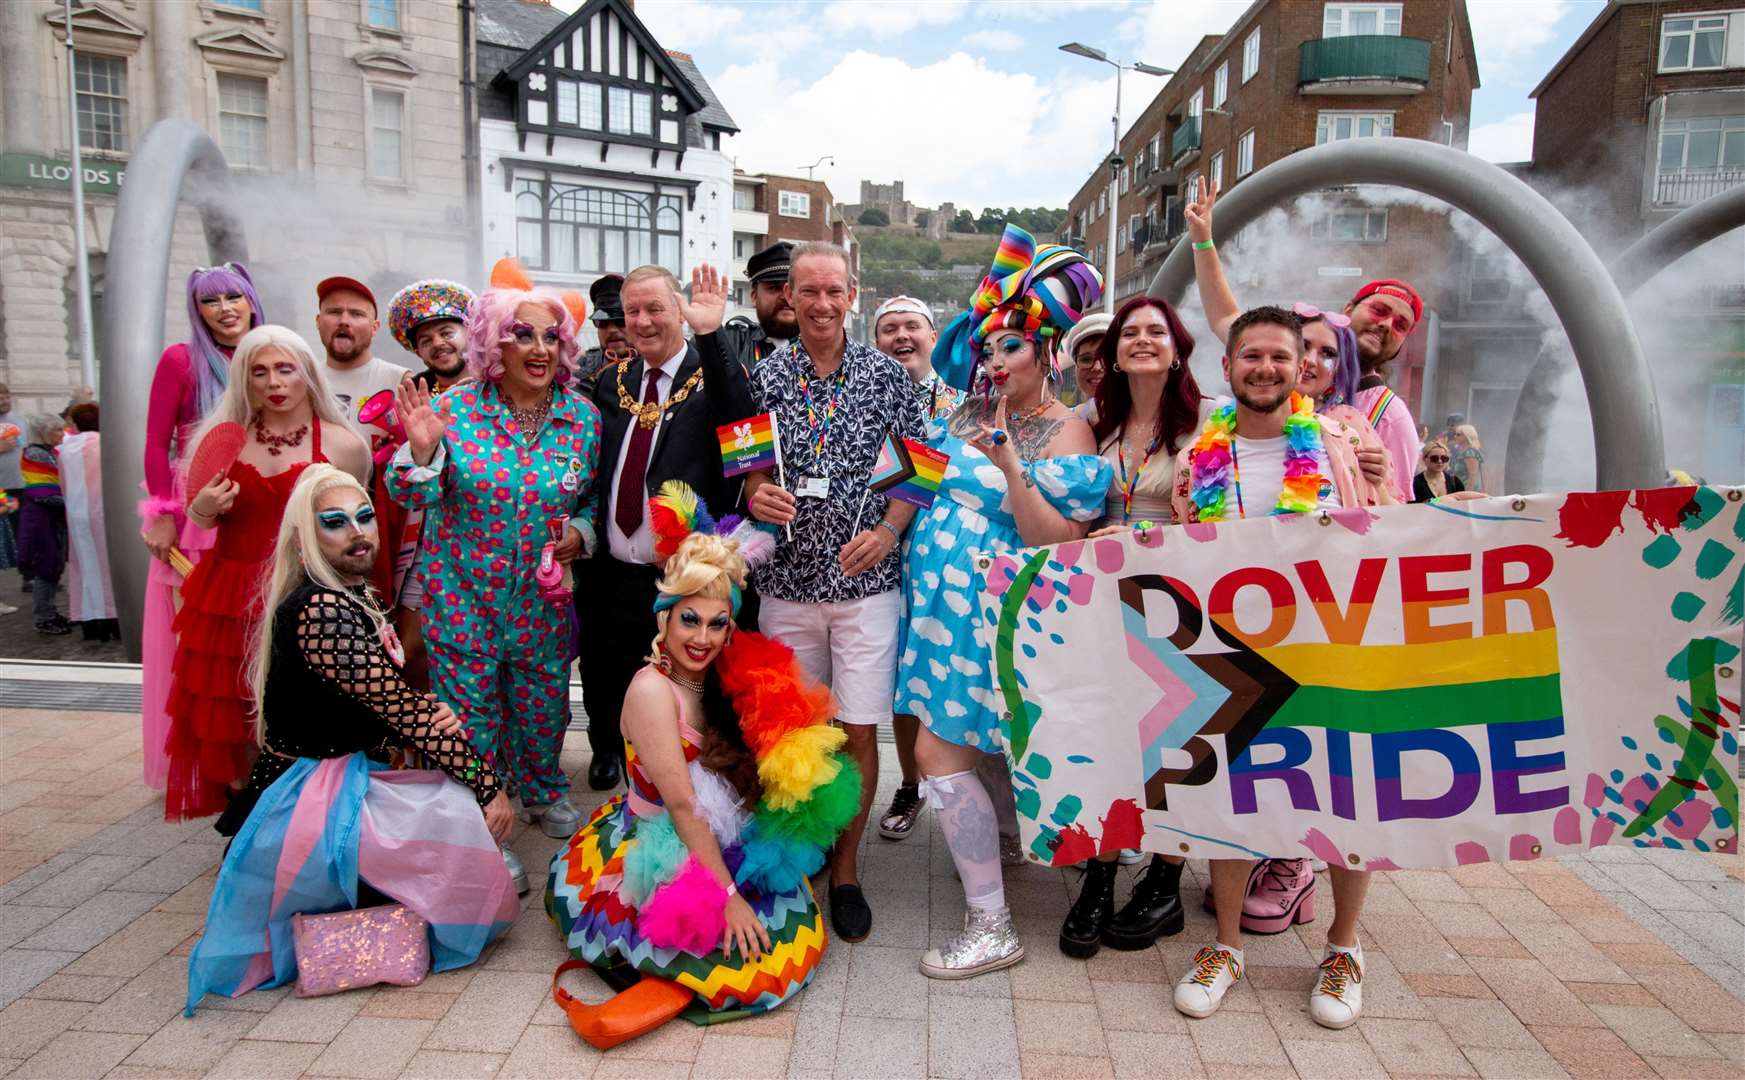 Dover Pride will see a colourful parade march through the town over the bank holiday weekend